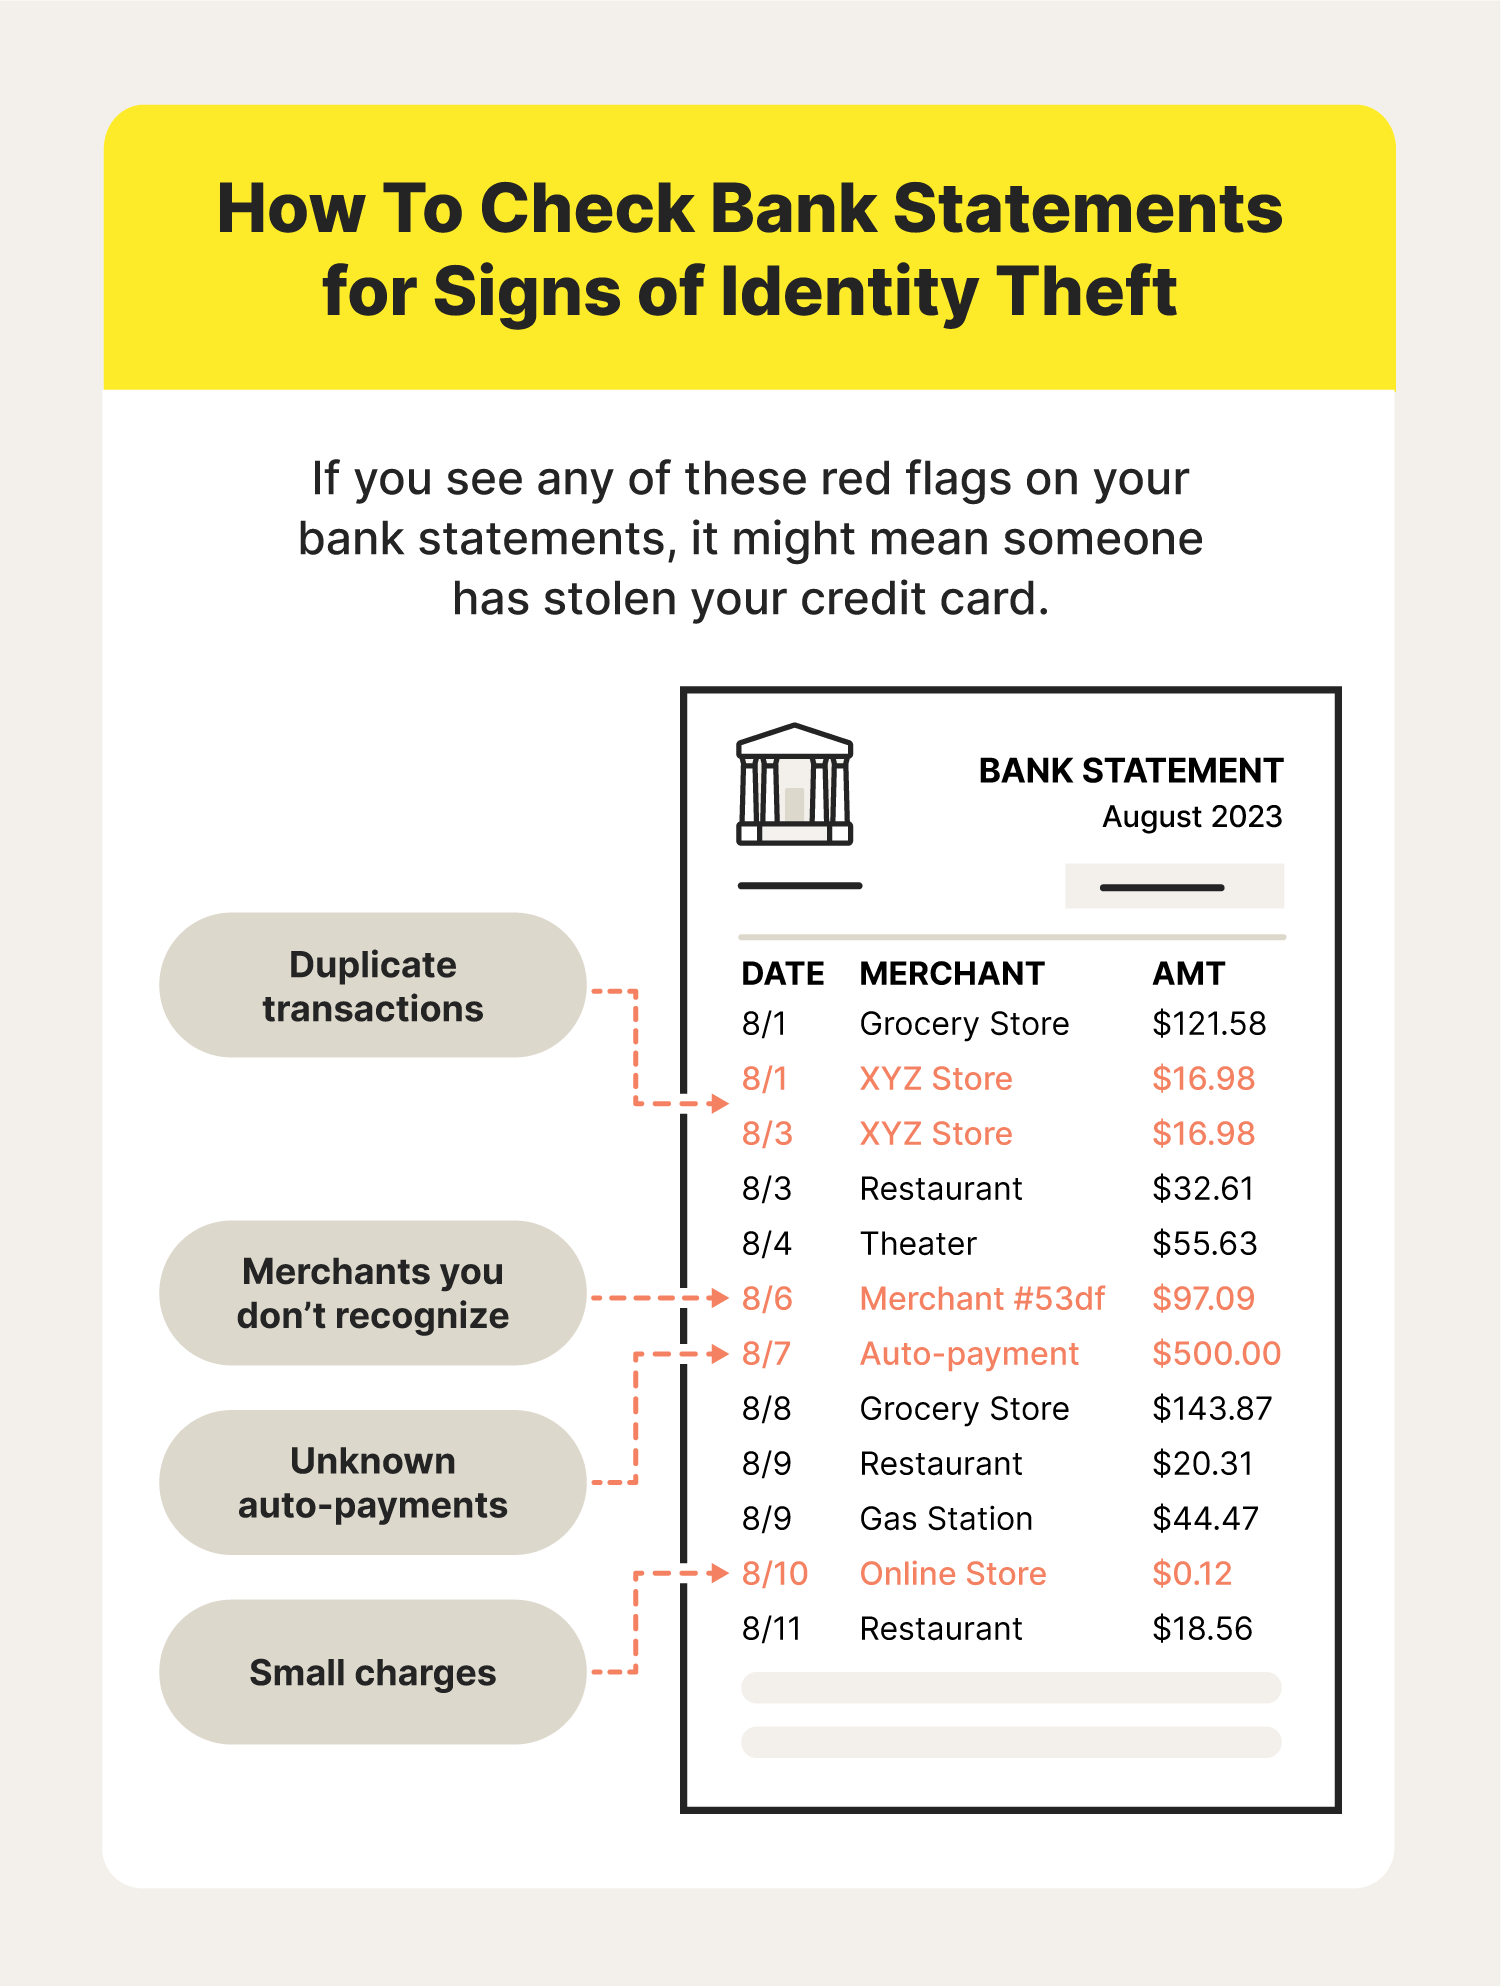 An annotated bank statement with items to look for that might be signs someone is trying to use your identity, including duplicate transactions and more.